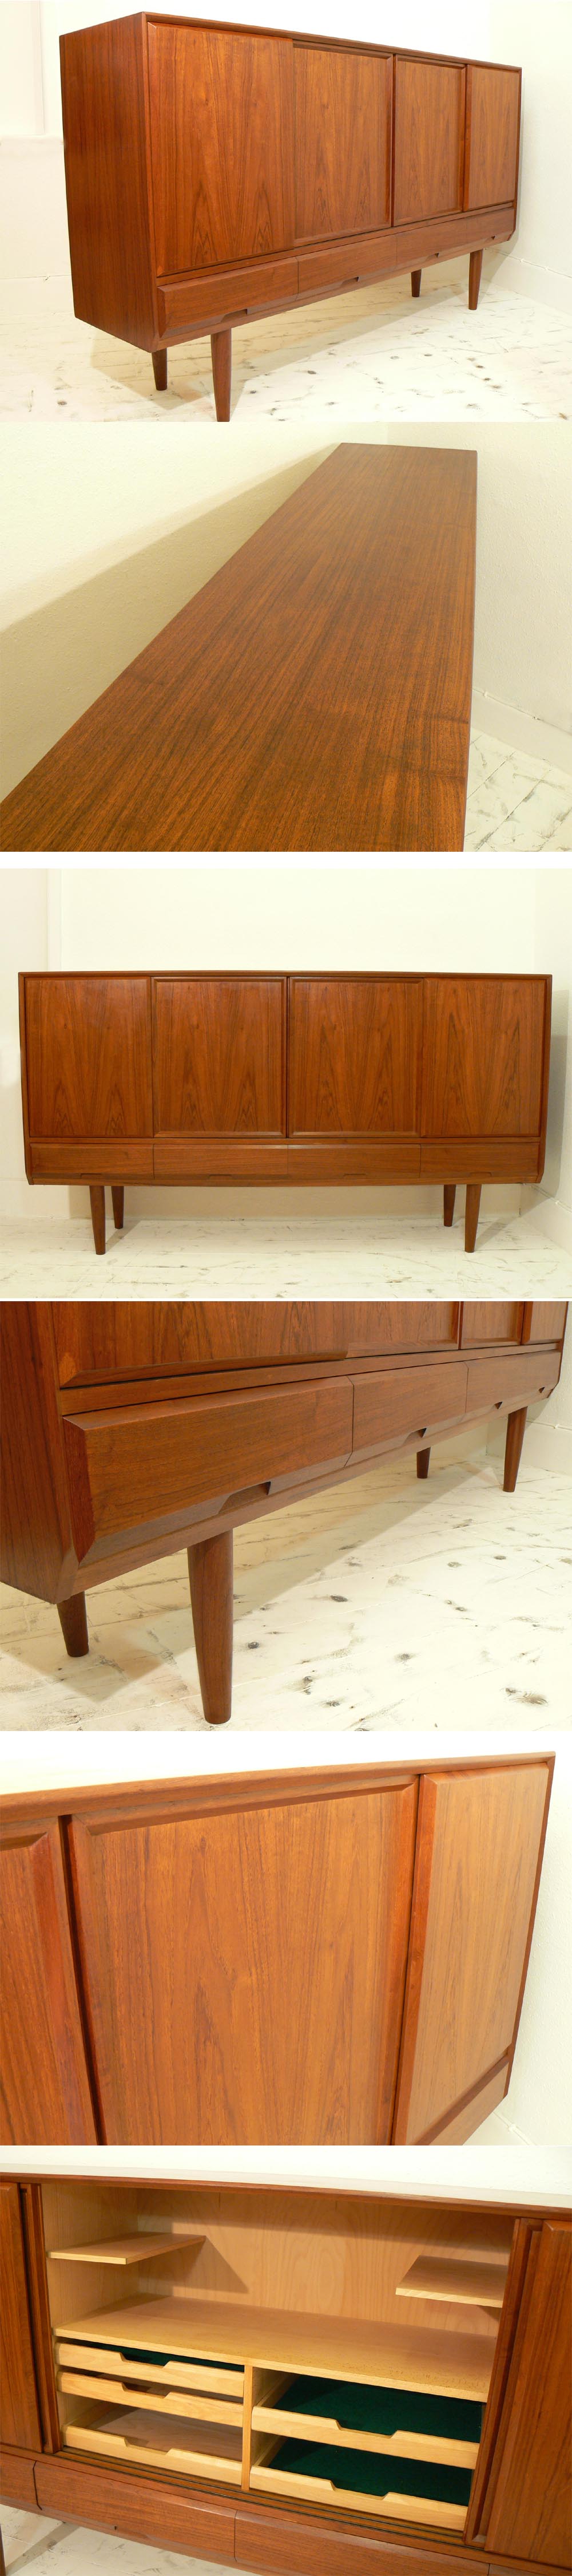 A large teak sideboard, c1970s. Manufactured by V.S Mobelfabrik, Denmark. A stunning unit with a lovely angular cut.